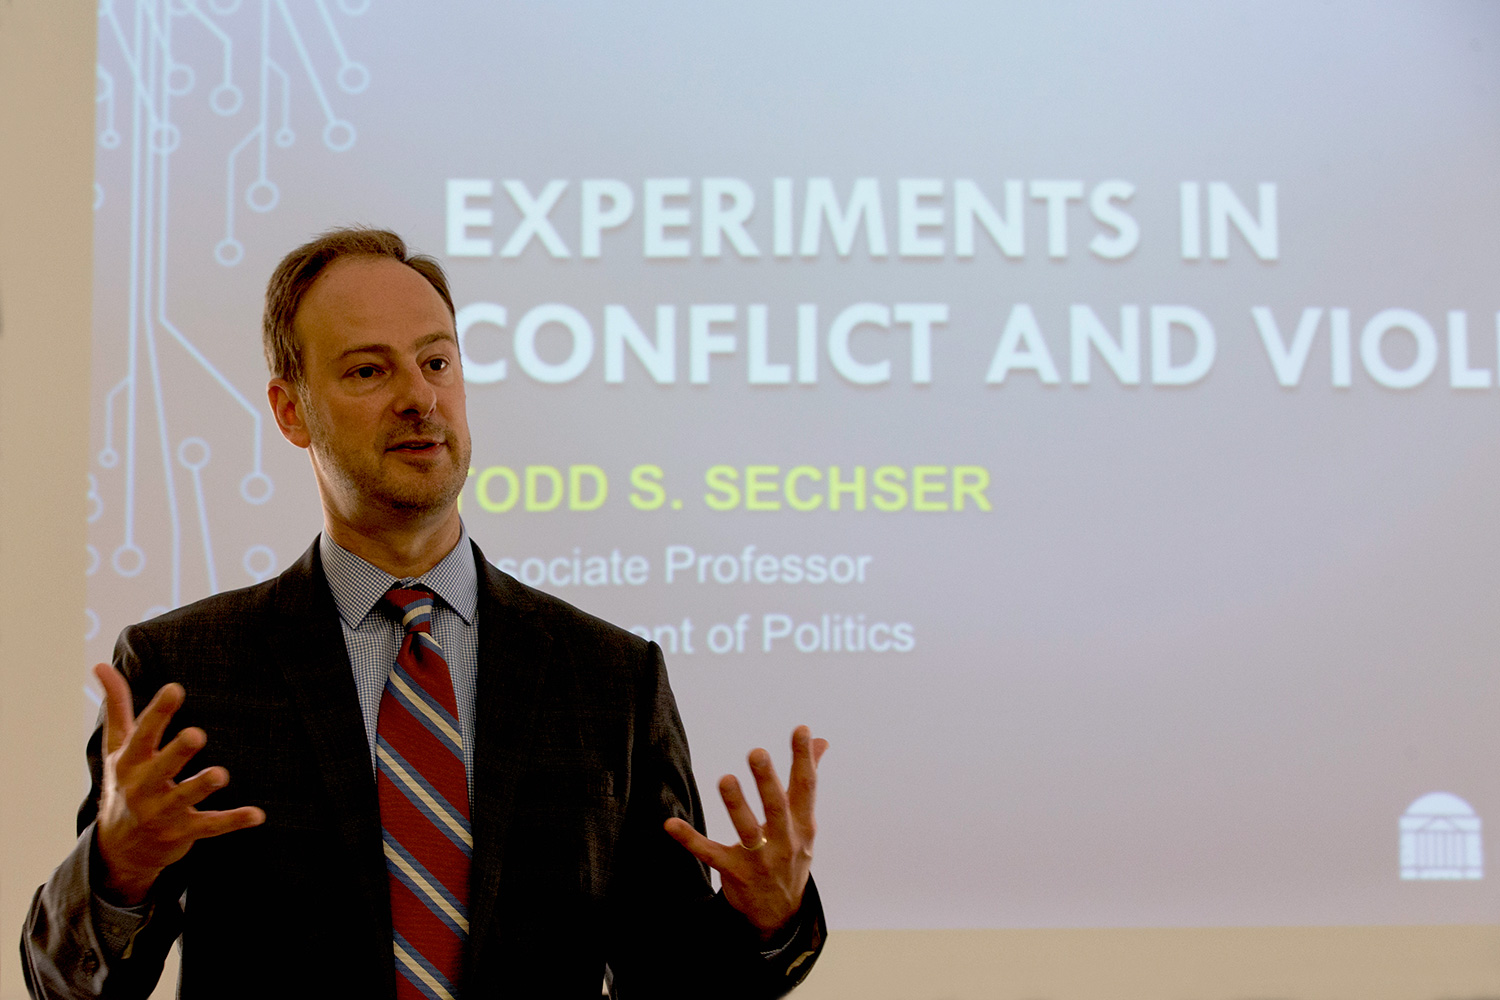 Todd S. Sechser talking to a crowd